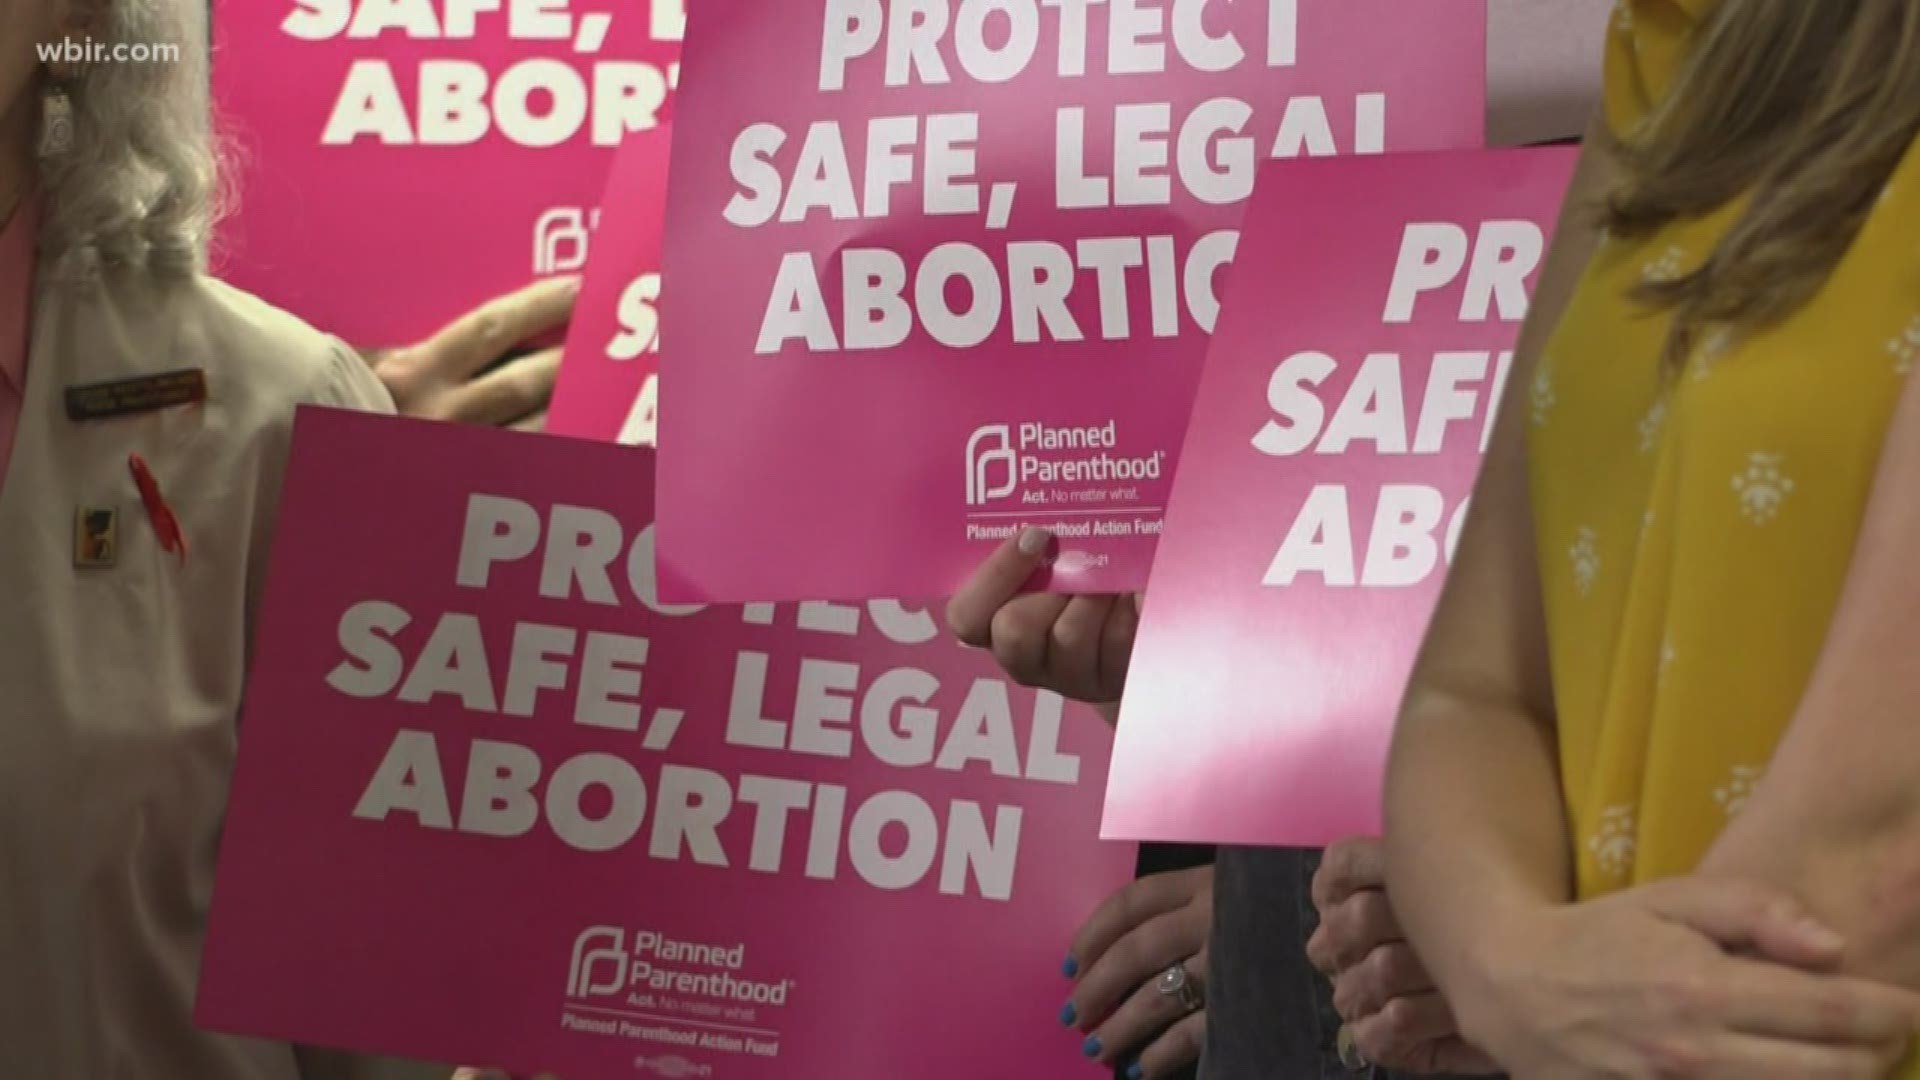 Abortion rights advocates in Knoxville say they have not been heard when it comes to a controversial proposal to change the state's abortion laws, but the proposal is also getting resistance from pro-life groups that want to ban abortion.